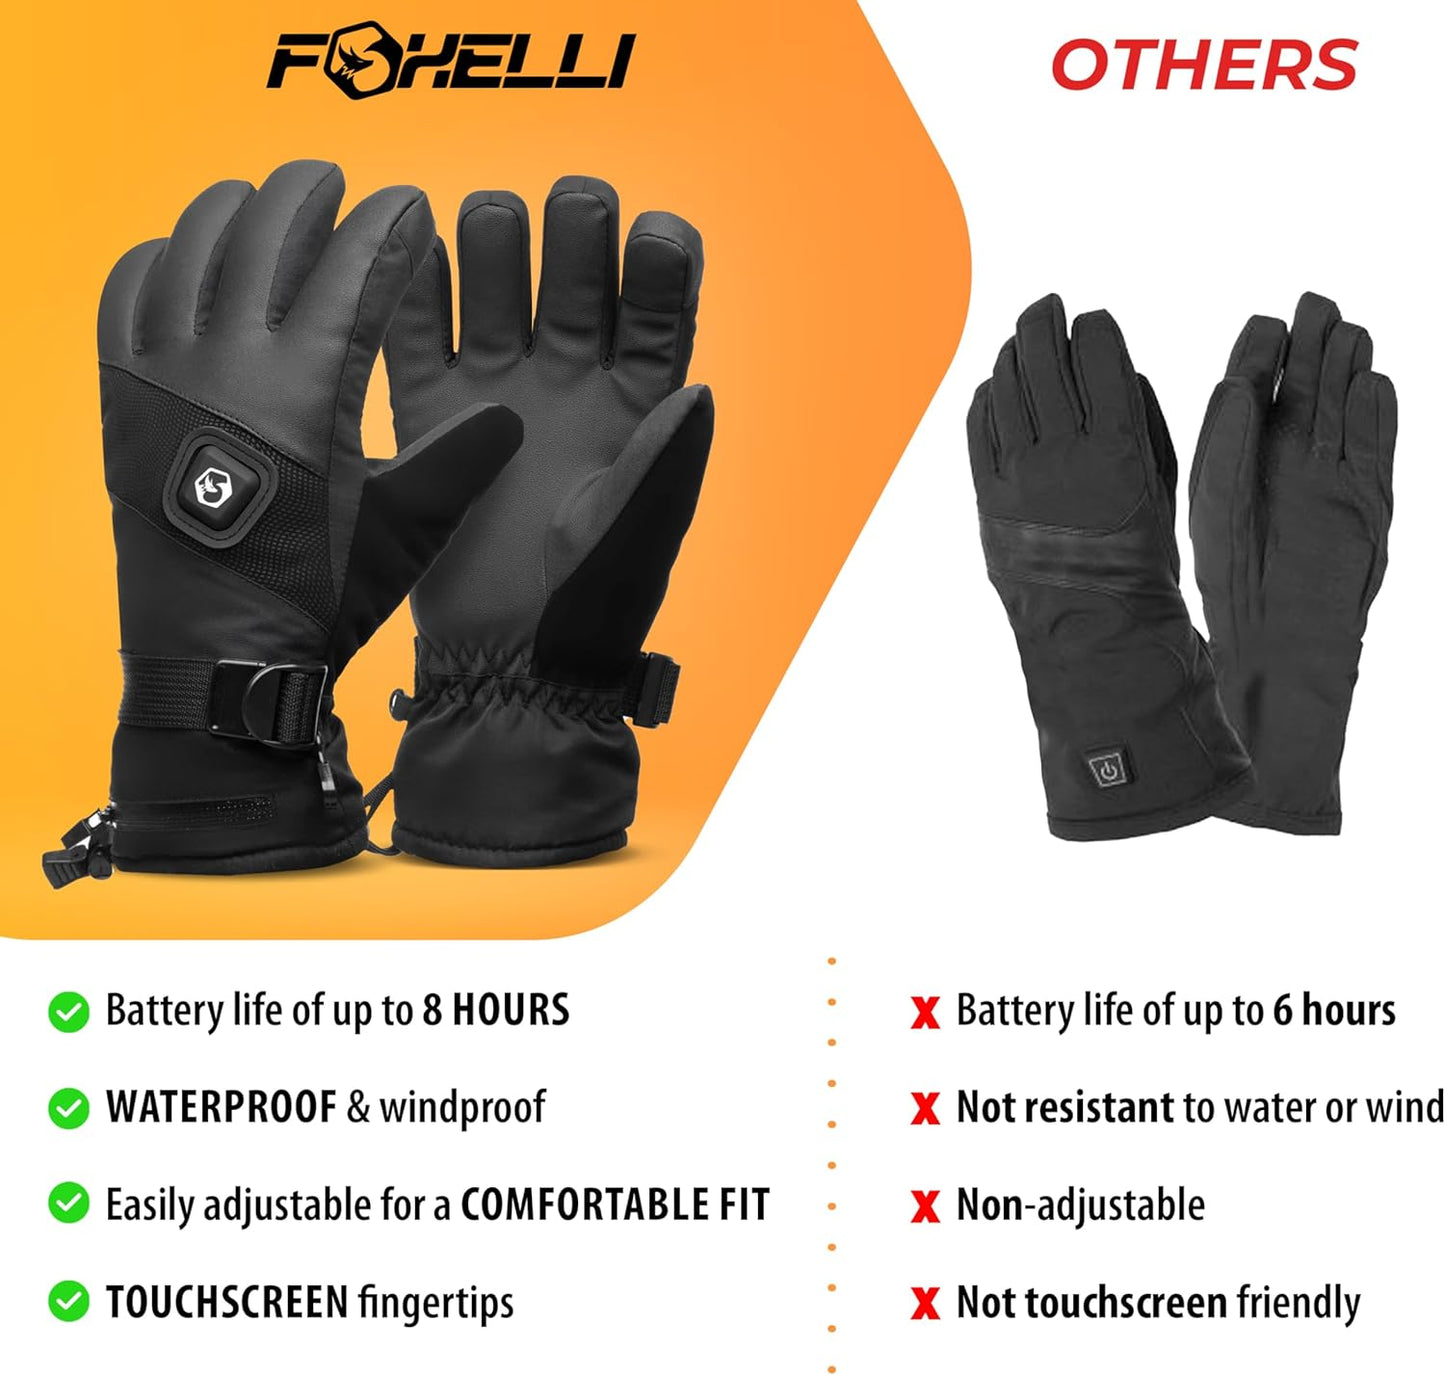 Foxelli™ - Heated Gloves – Rechargeable Waterproof Electric Warmth Gloves for Men & Women